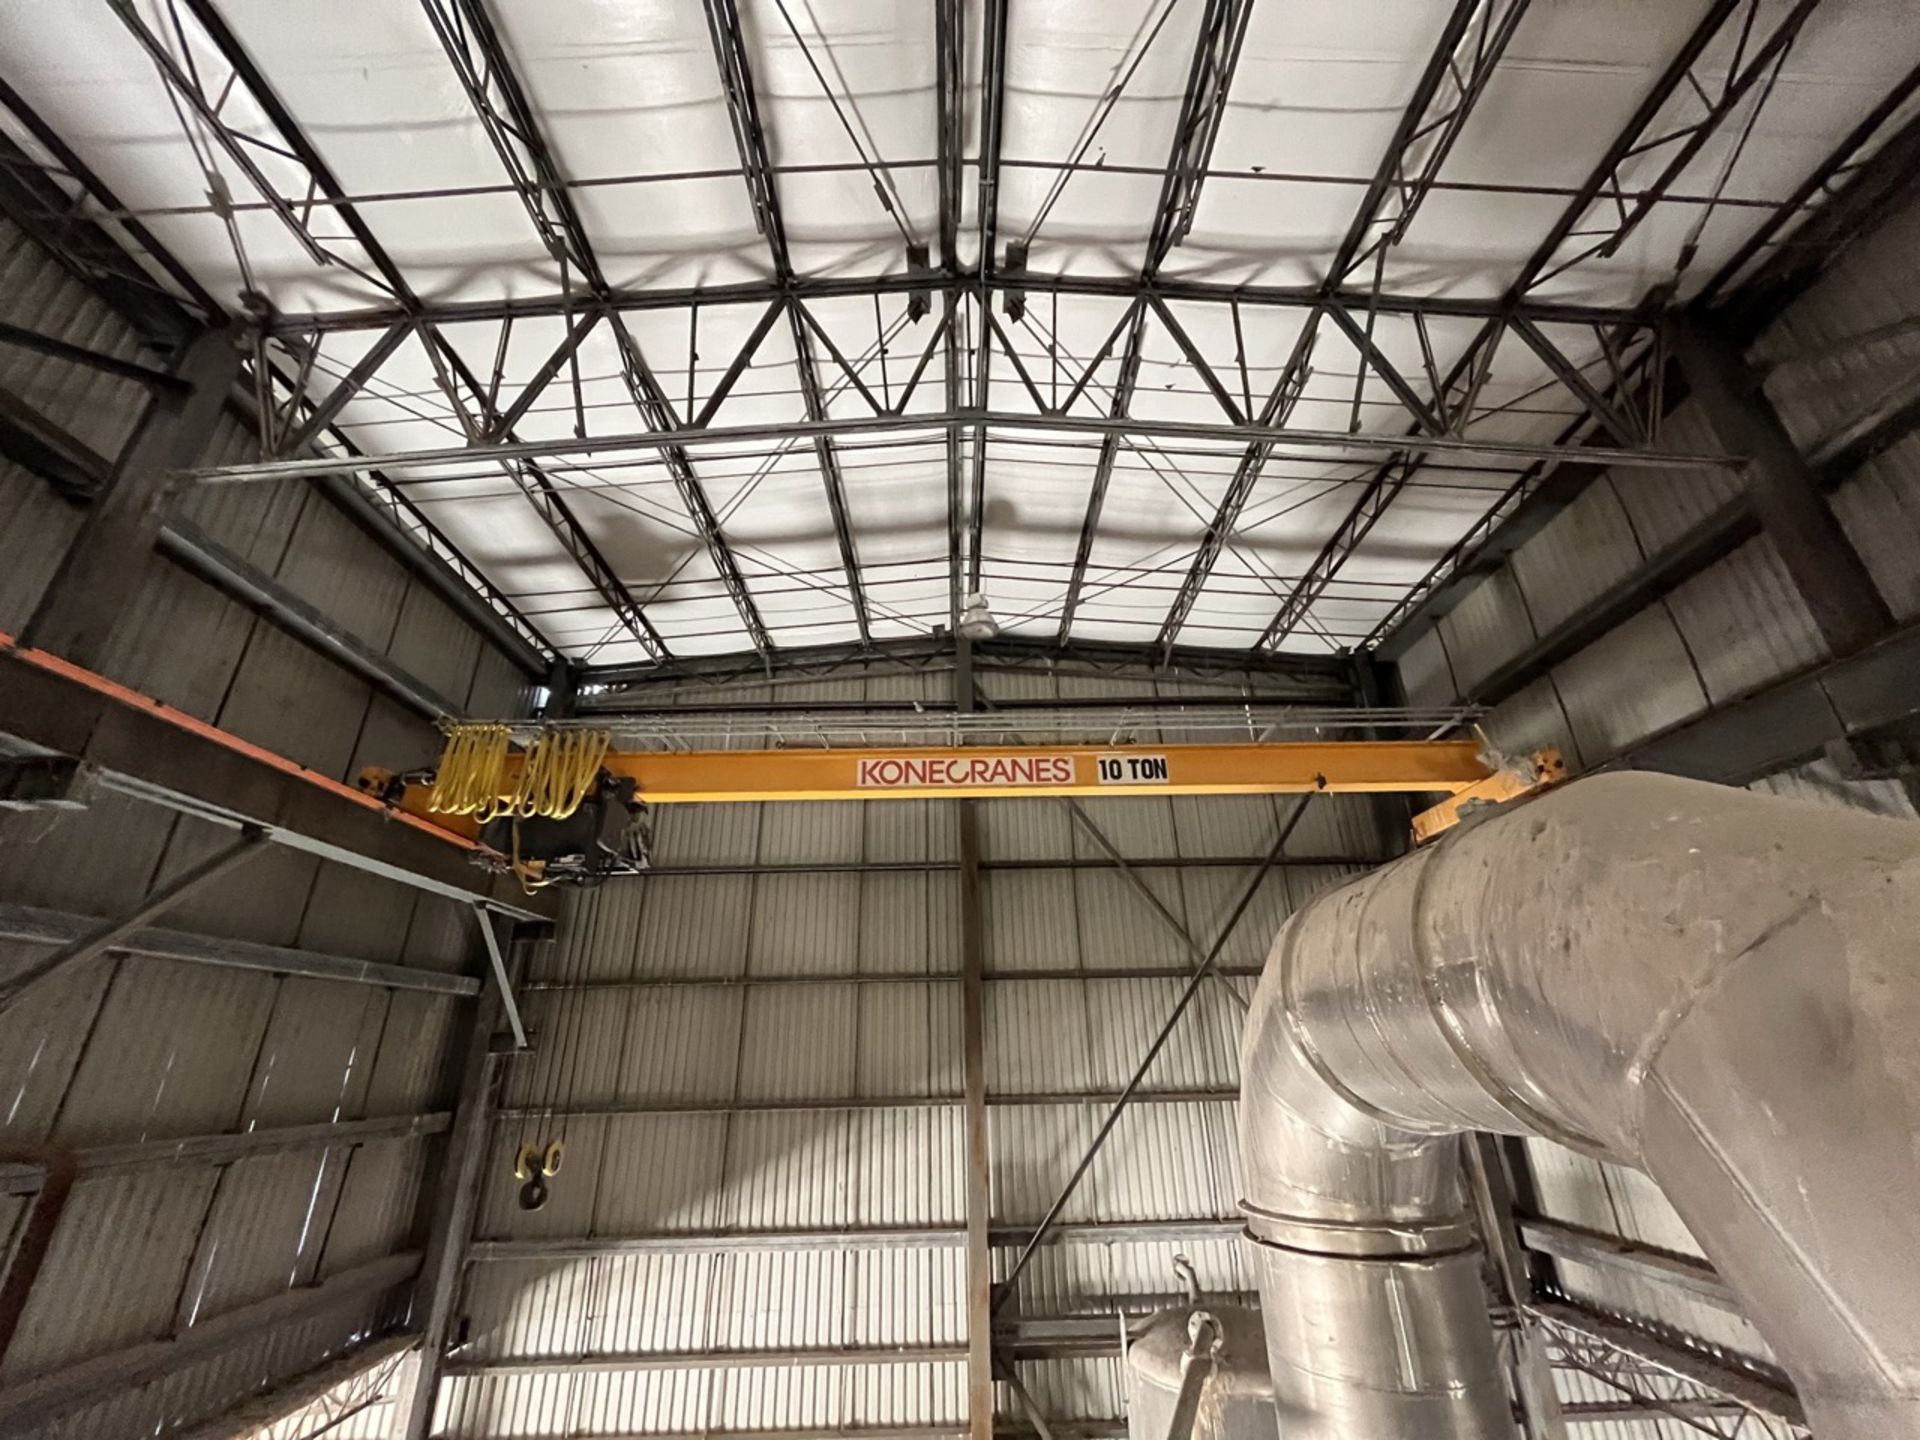 Konecranes overhead crane with a load capacity of 10 tons and a 15-meter lifting capacity; includes - Image 16 of 19